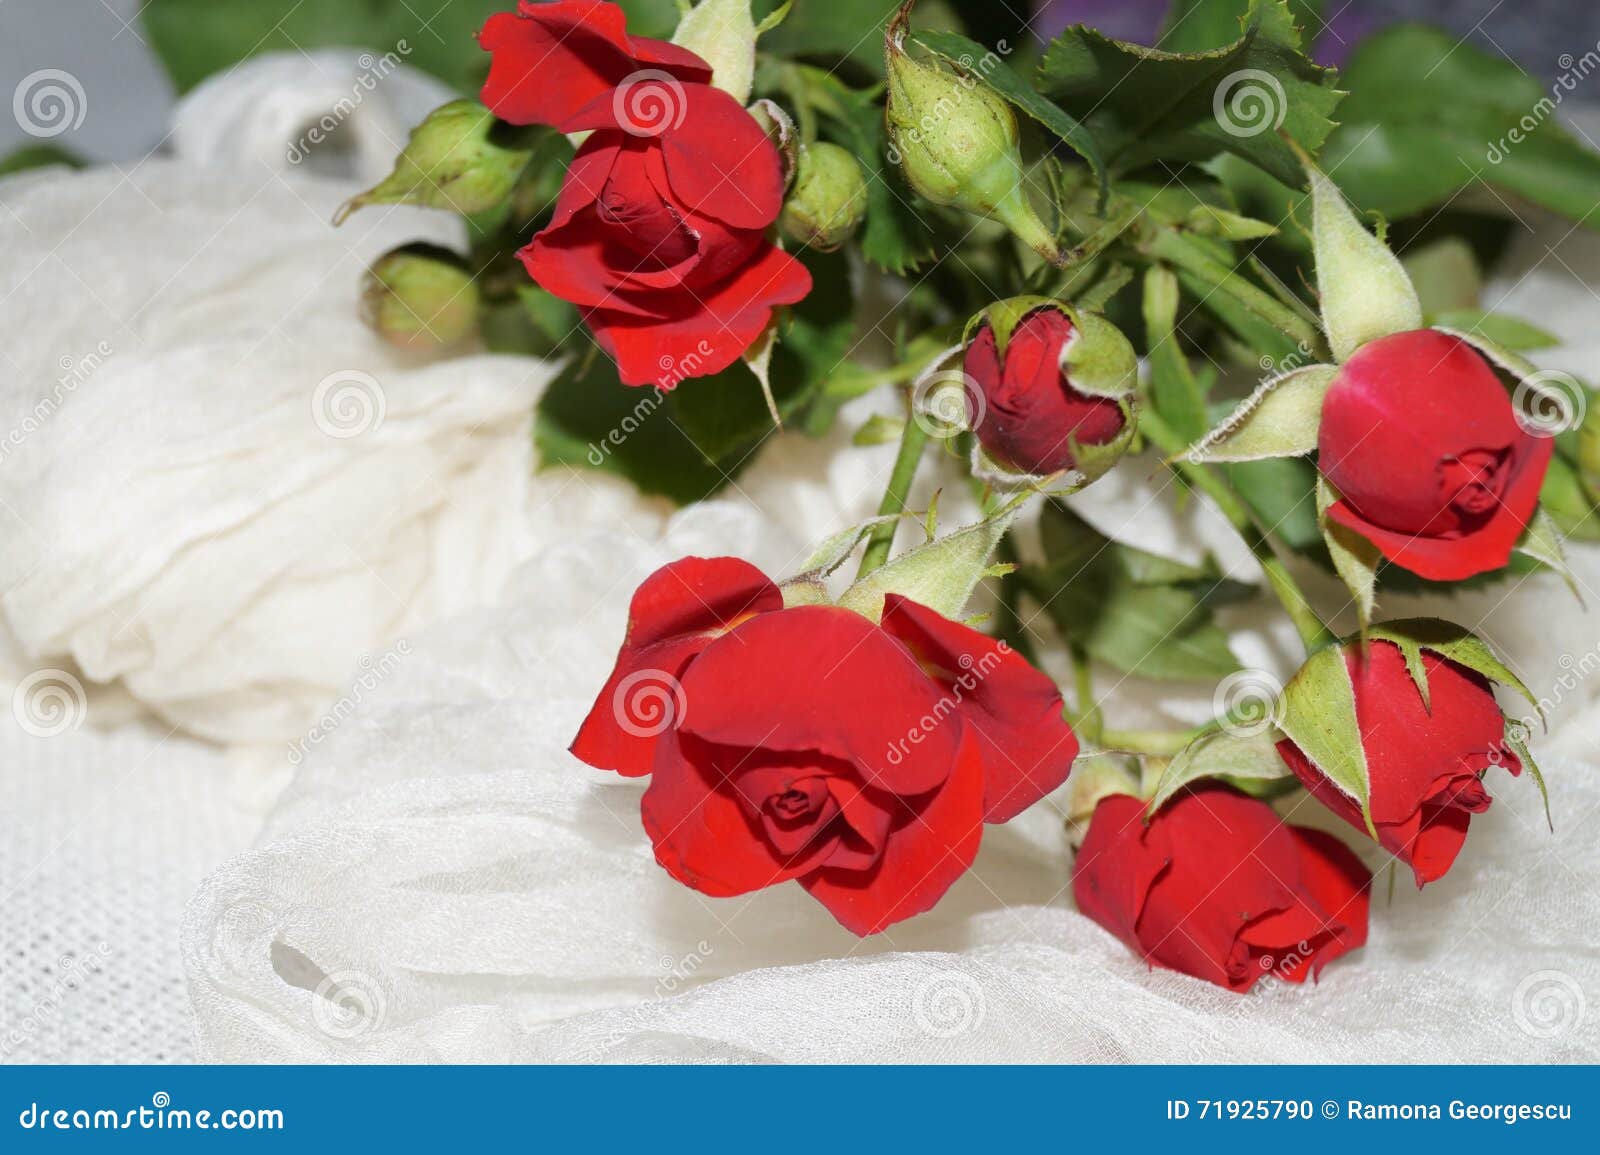 Bouquet of red roses stock photo. Image of blooming, silk - 71925790